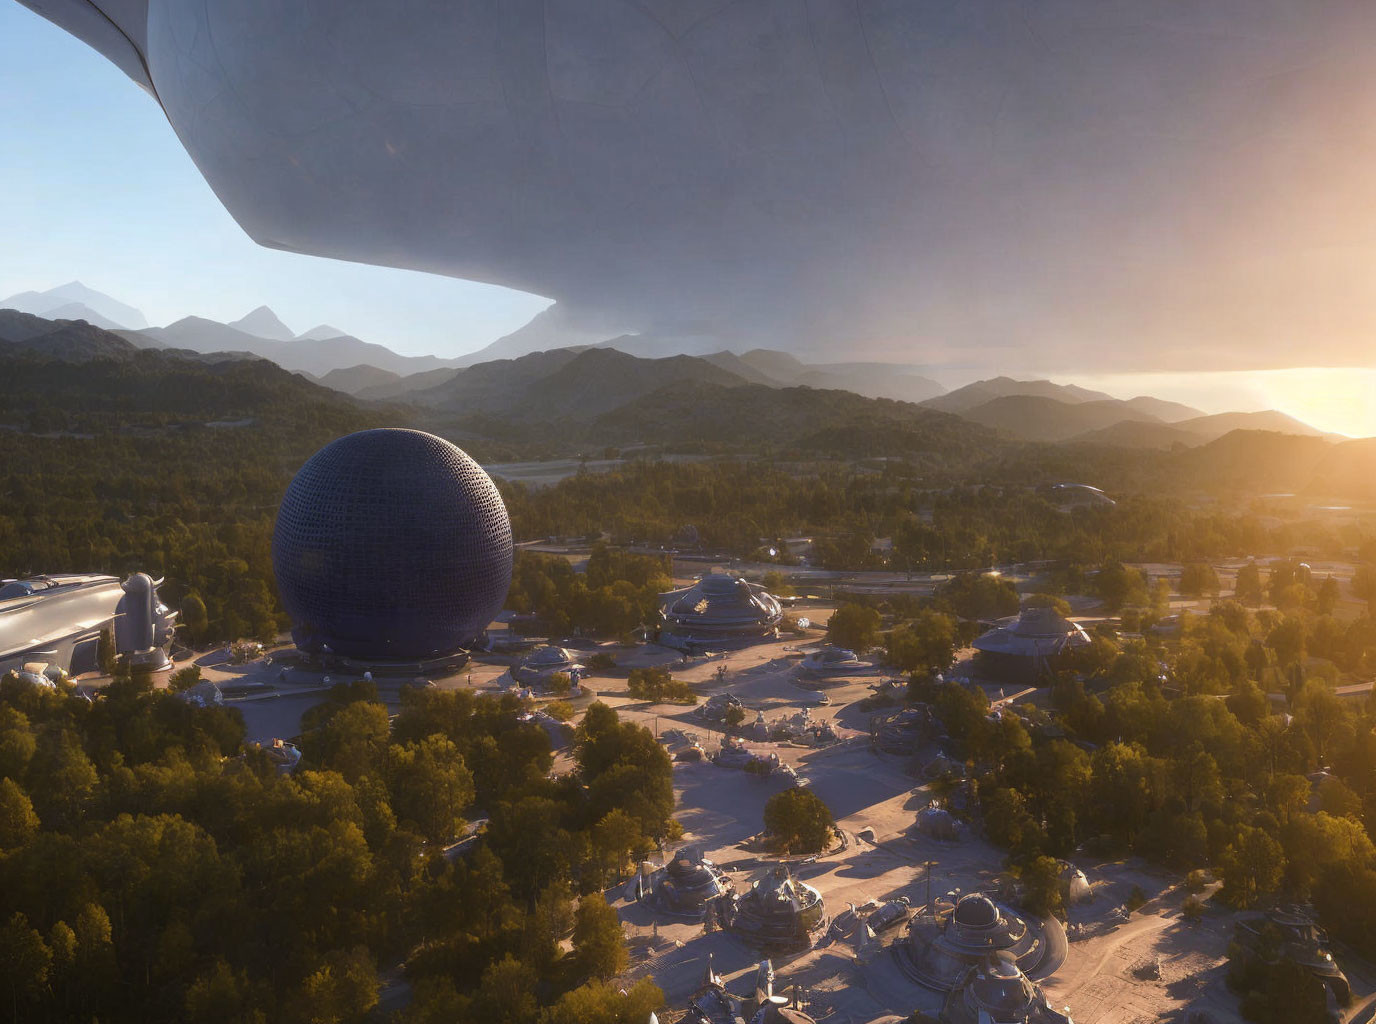 Futuristic landscape with spherical structure, domes, mountains, and spaceship at sunrise